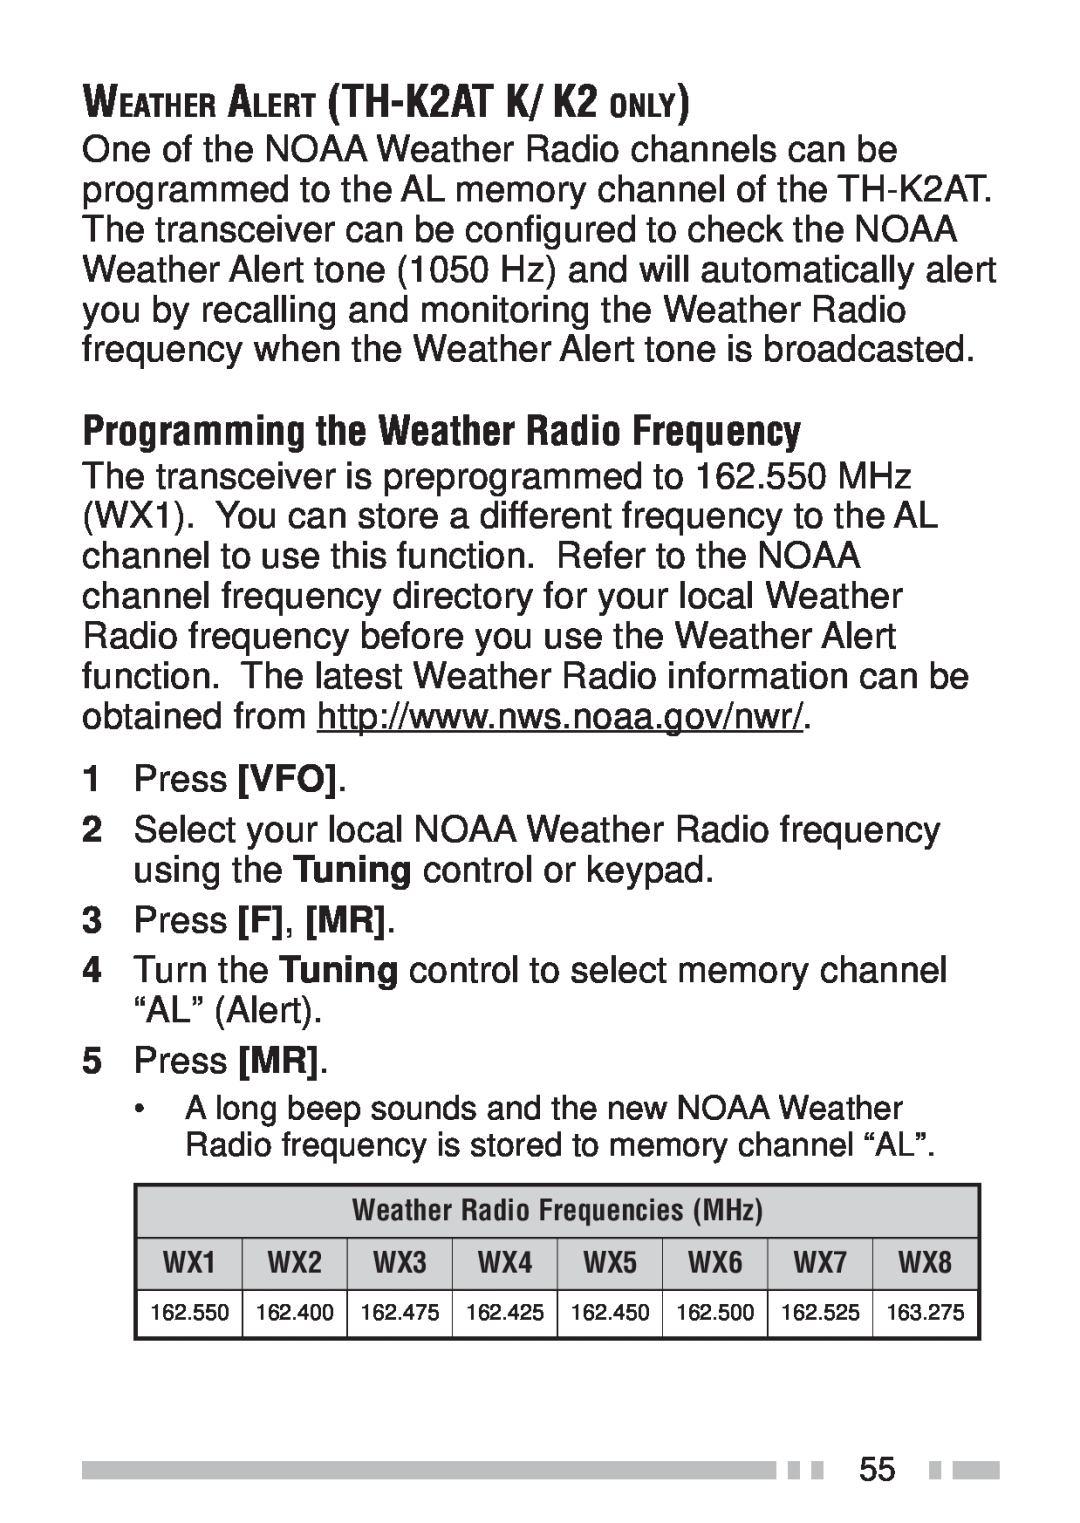 Kenwood TH-KAE, TH-K4AT, TH-K2ET WEATHER ALERT TH-K2ATK/ K2 ONLY, Programming the Weather Radio Frequency 